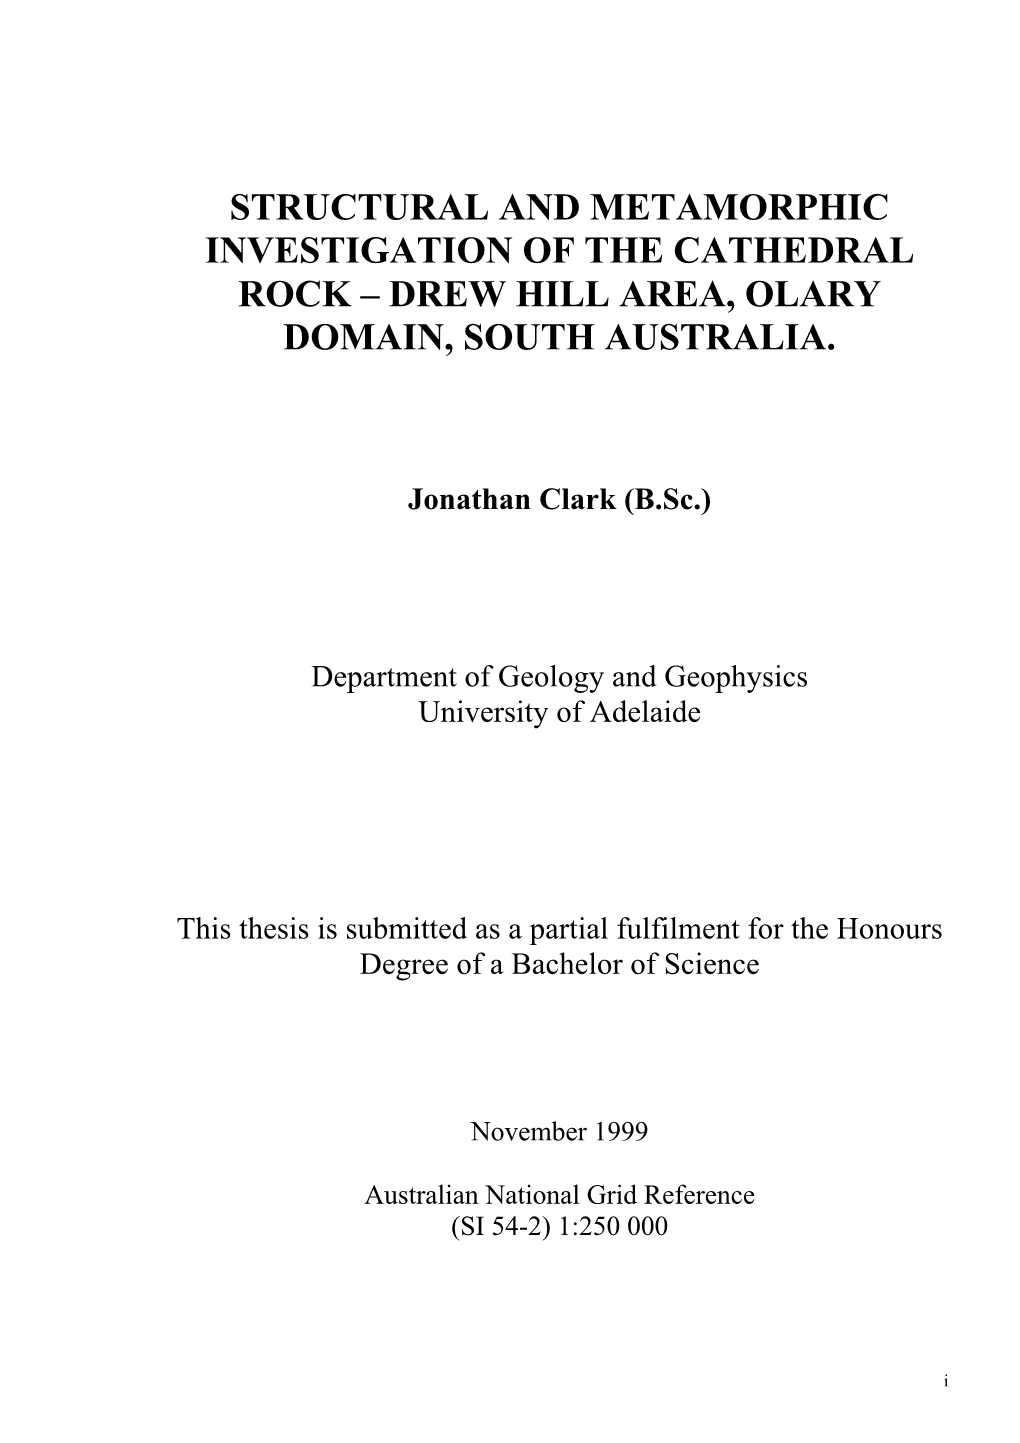 Structural and Metamorphic Investigation of the Cathedral Rock – Drew Hill Area, Olary Domain, South Australia